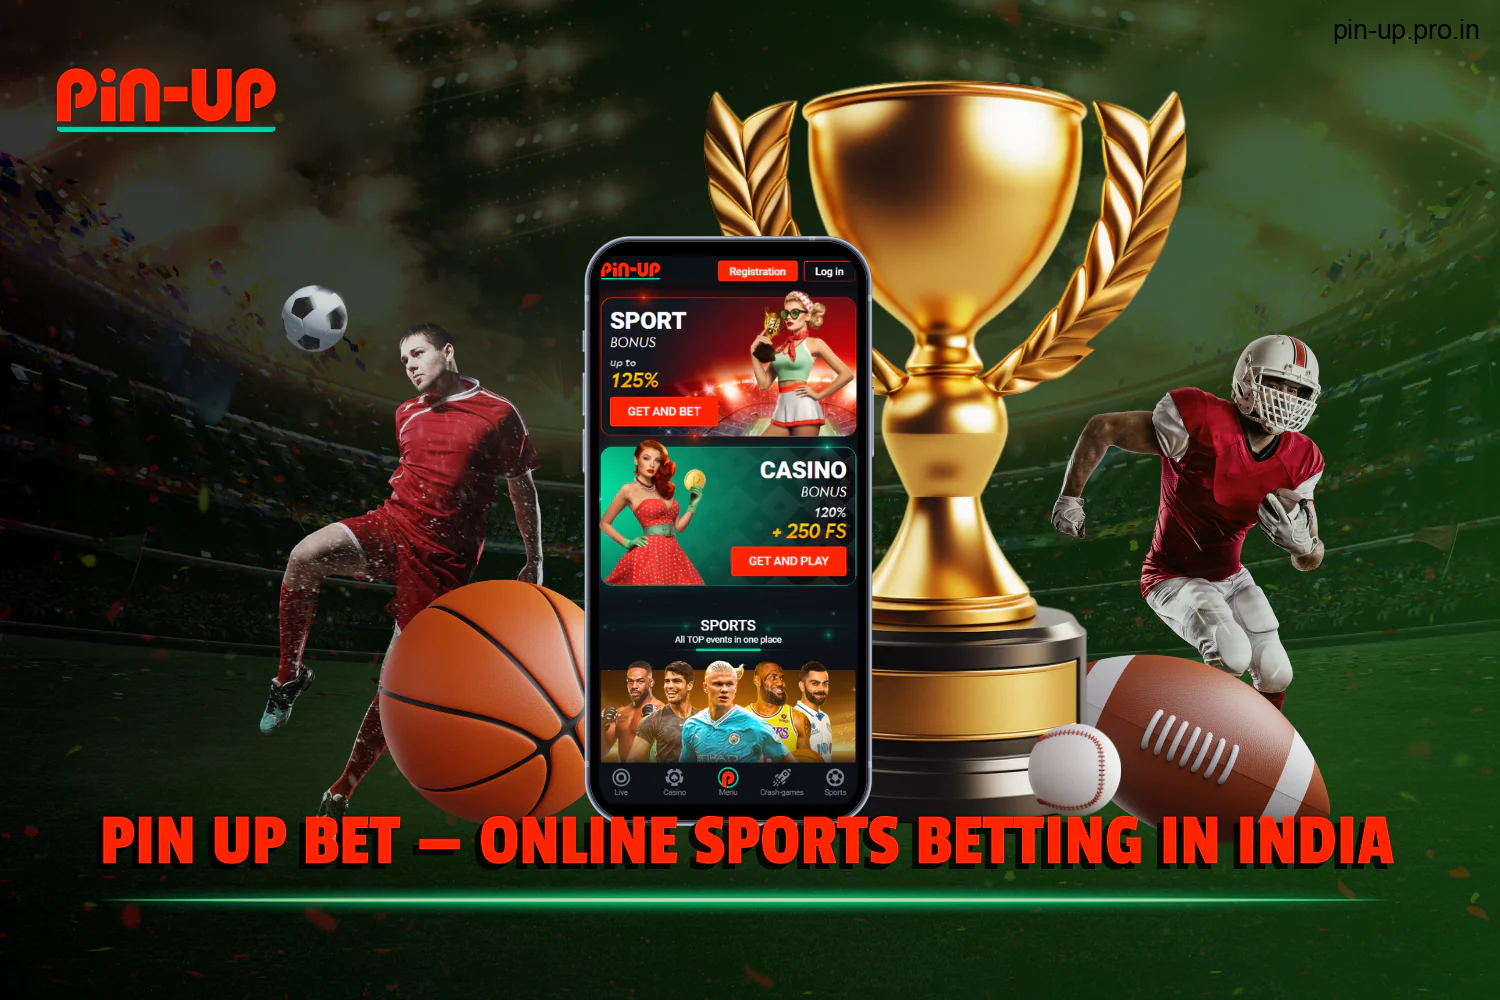 PinUp is an online sports betting platform in India where users can engage in real money gambling.